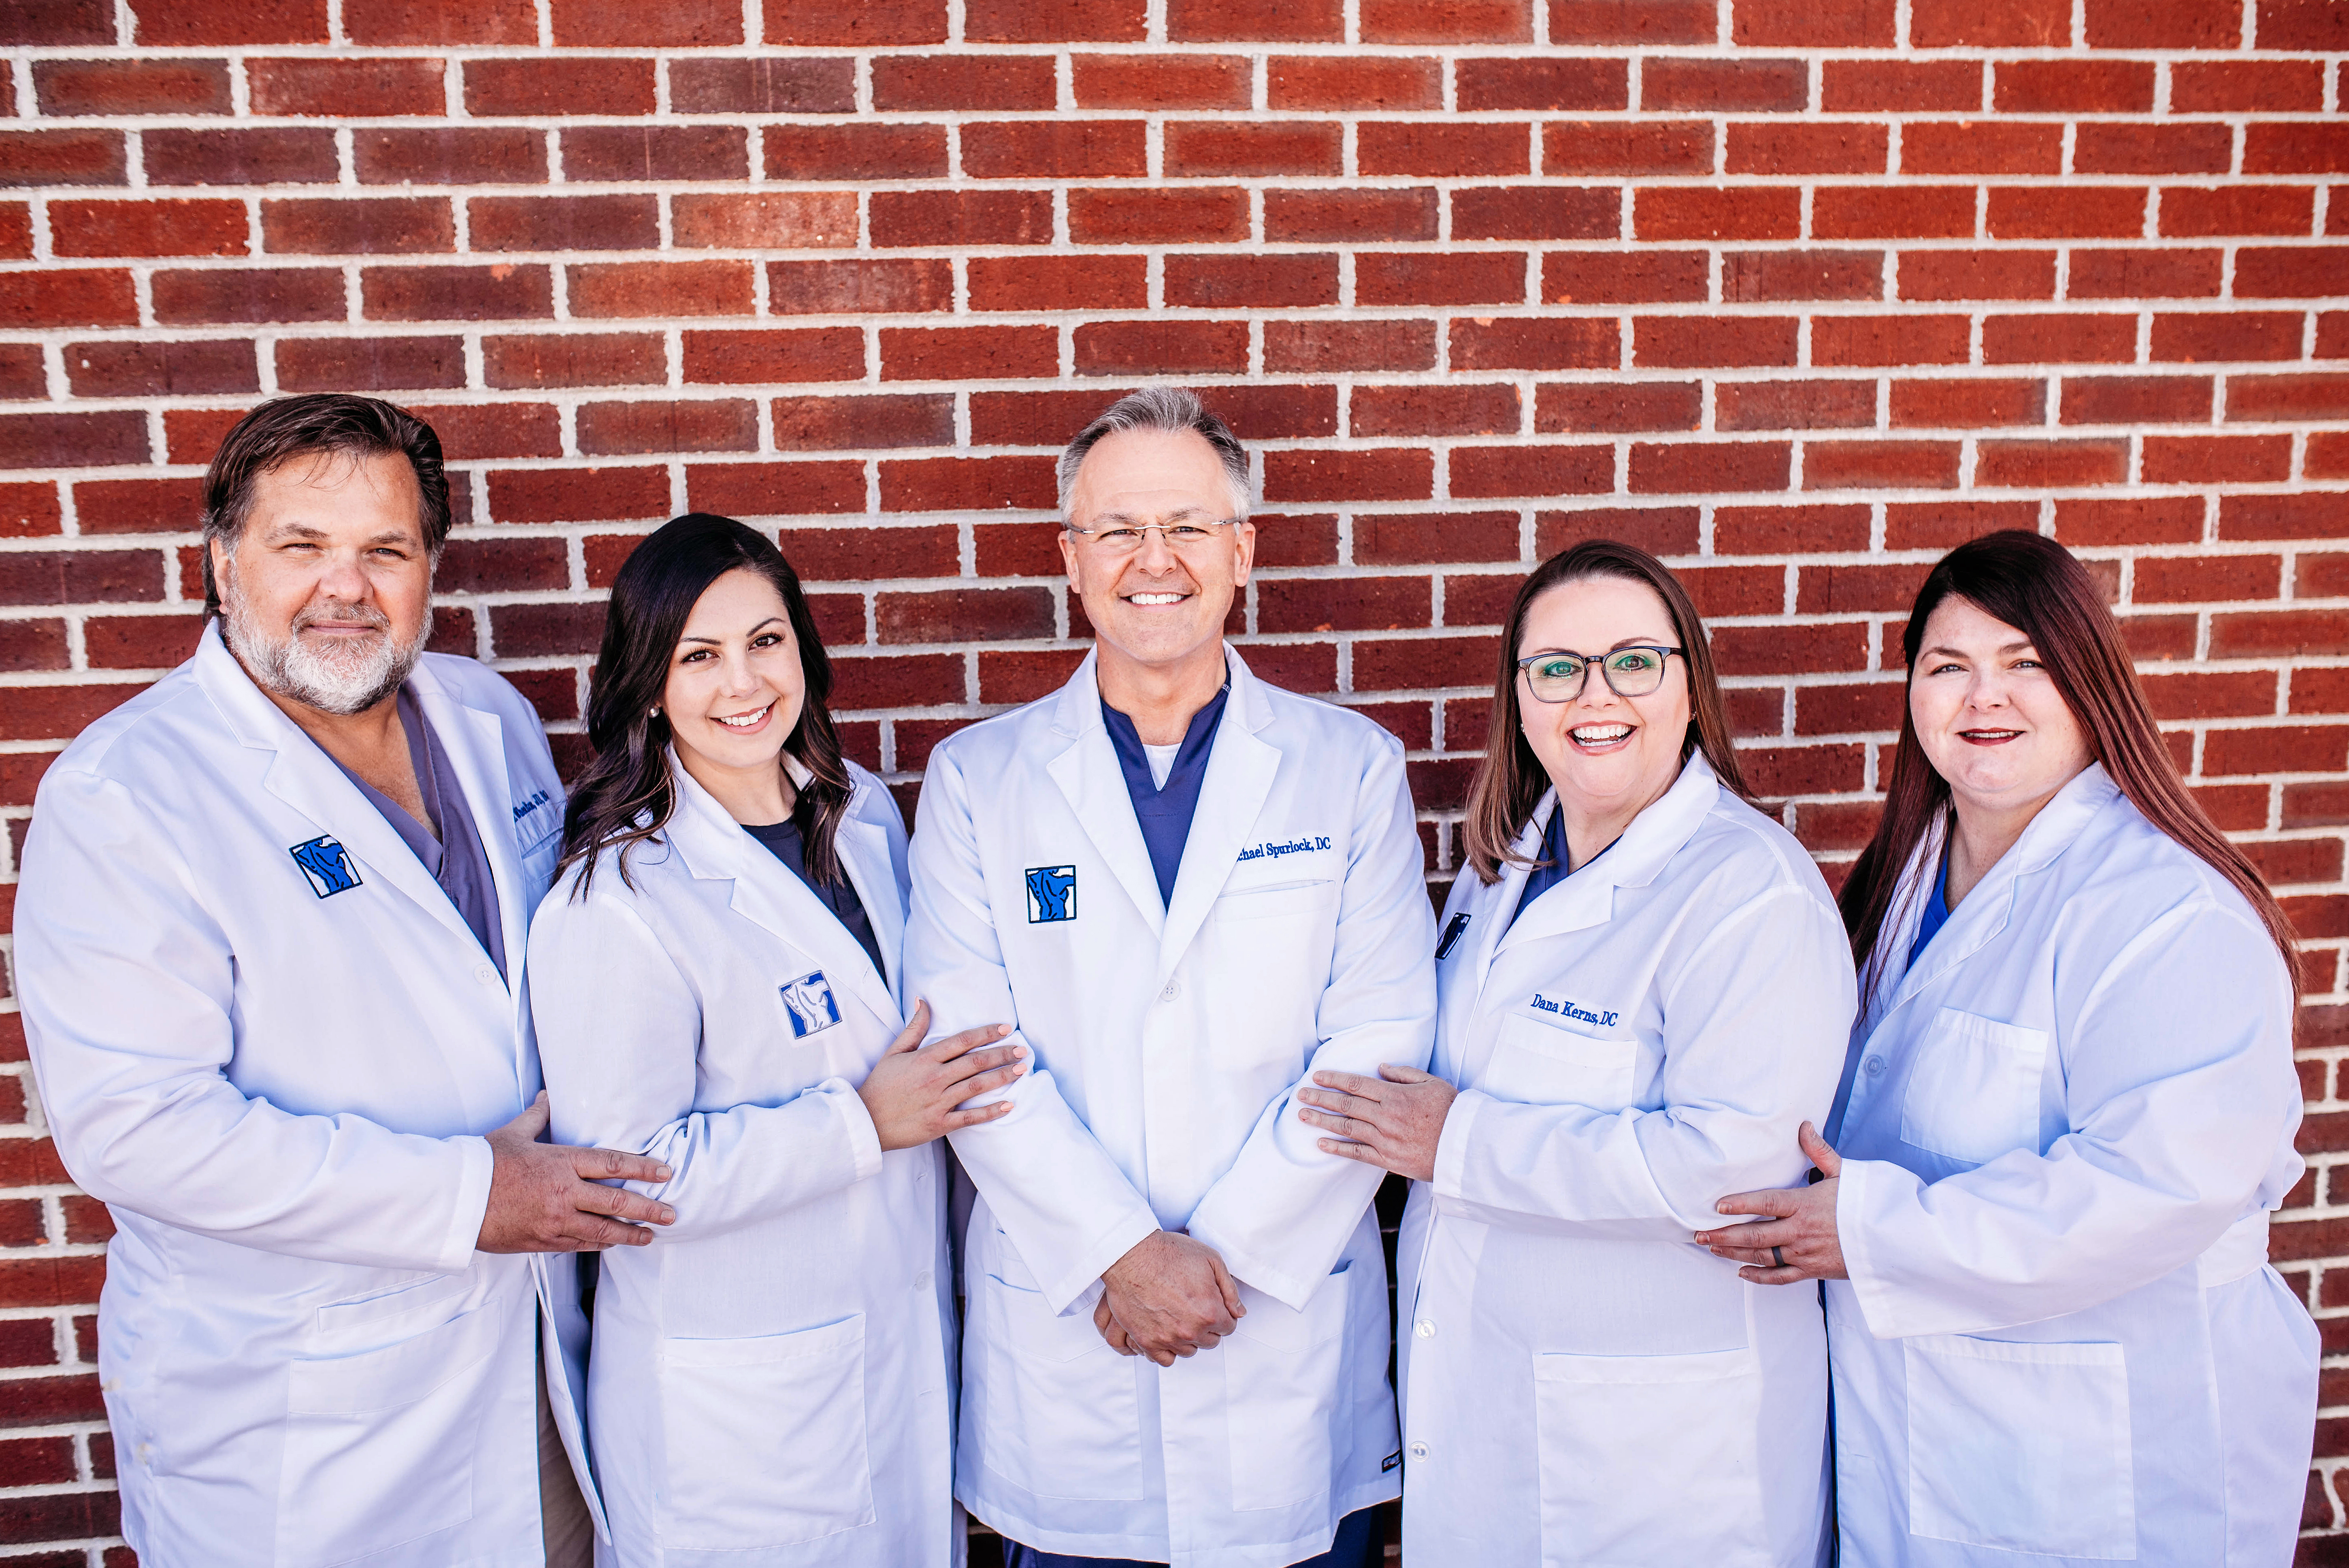 The great team at Kentucky Pain Institute and Spurlock Chiropractic Centre offers multi-disciplinary pain management.